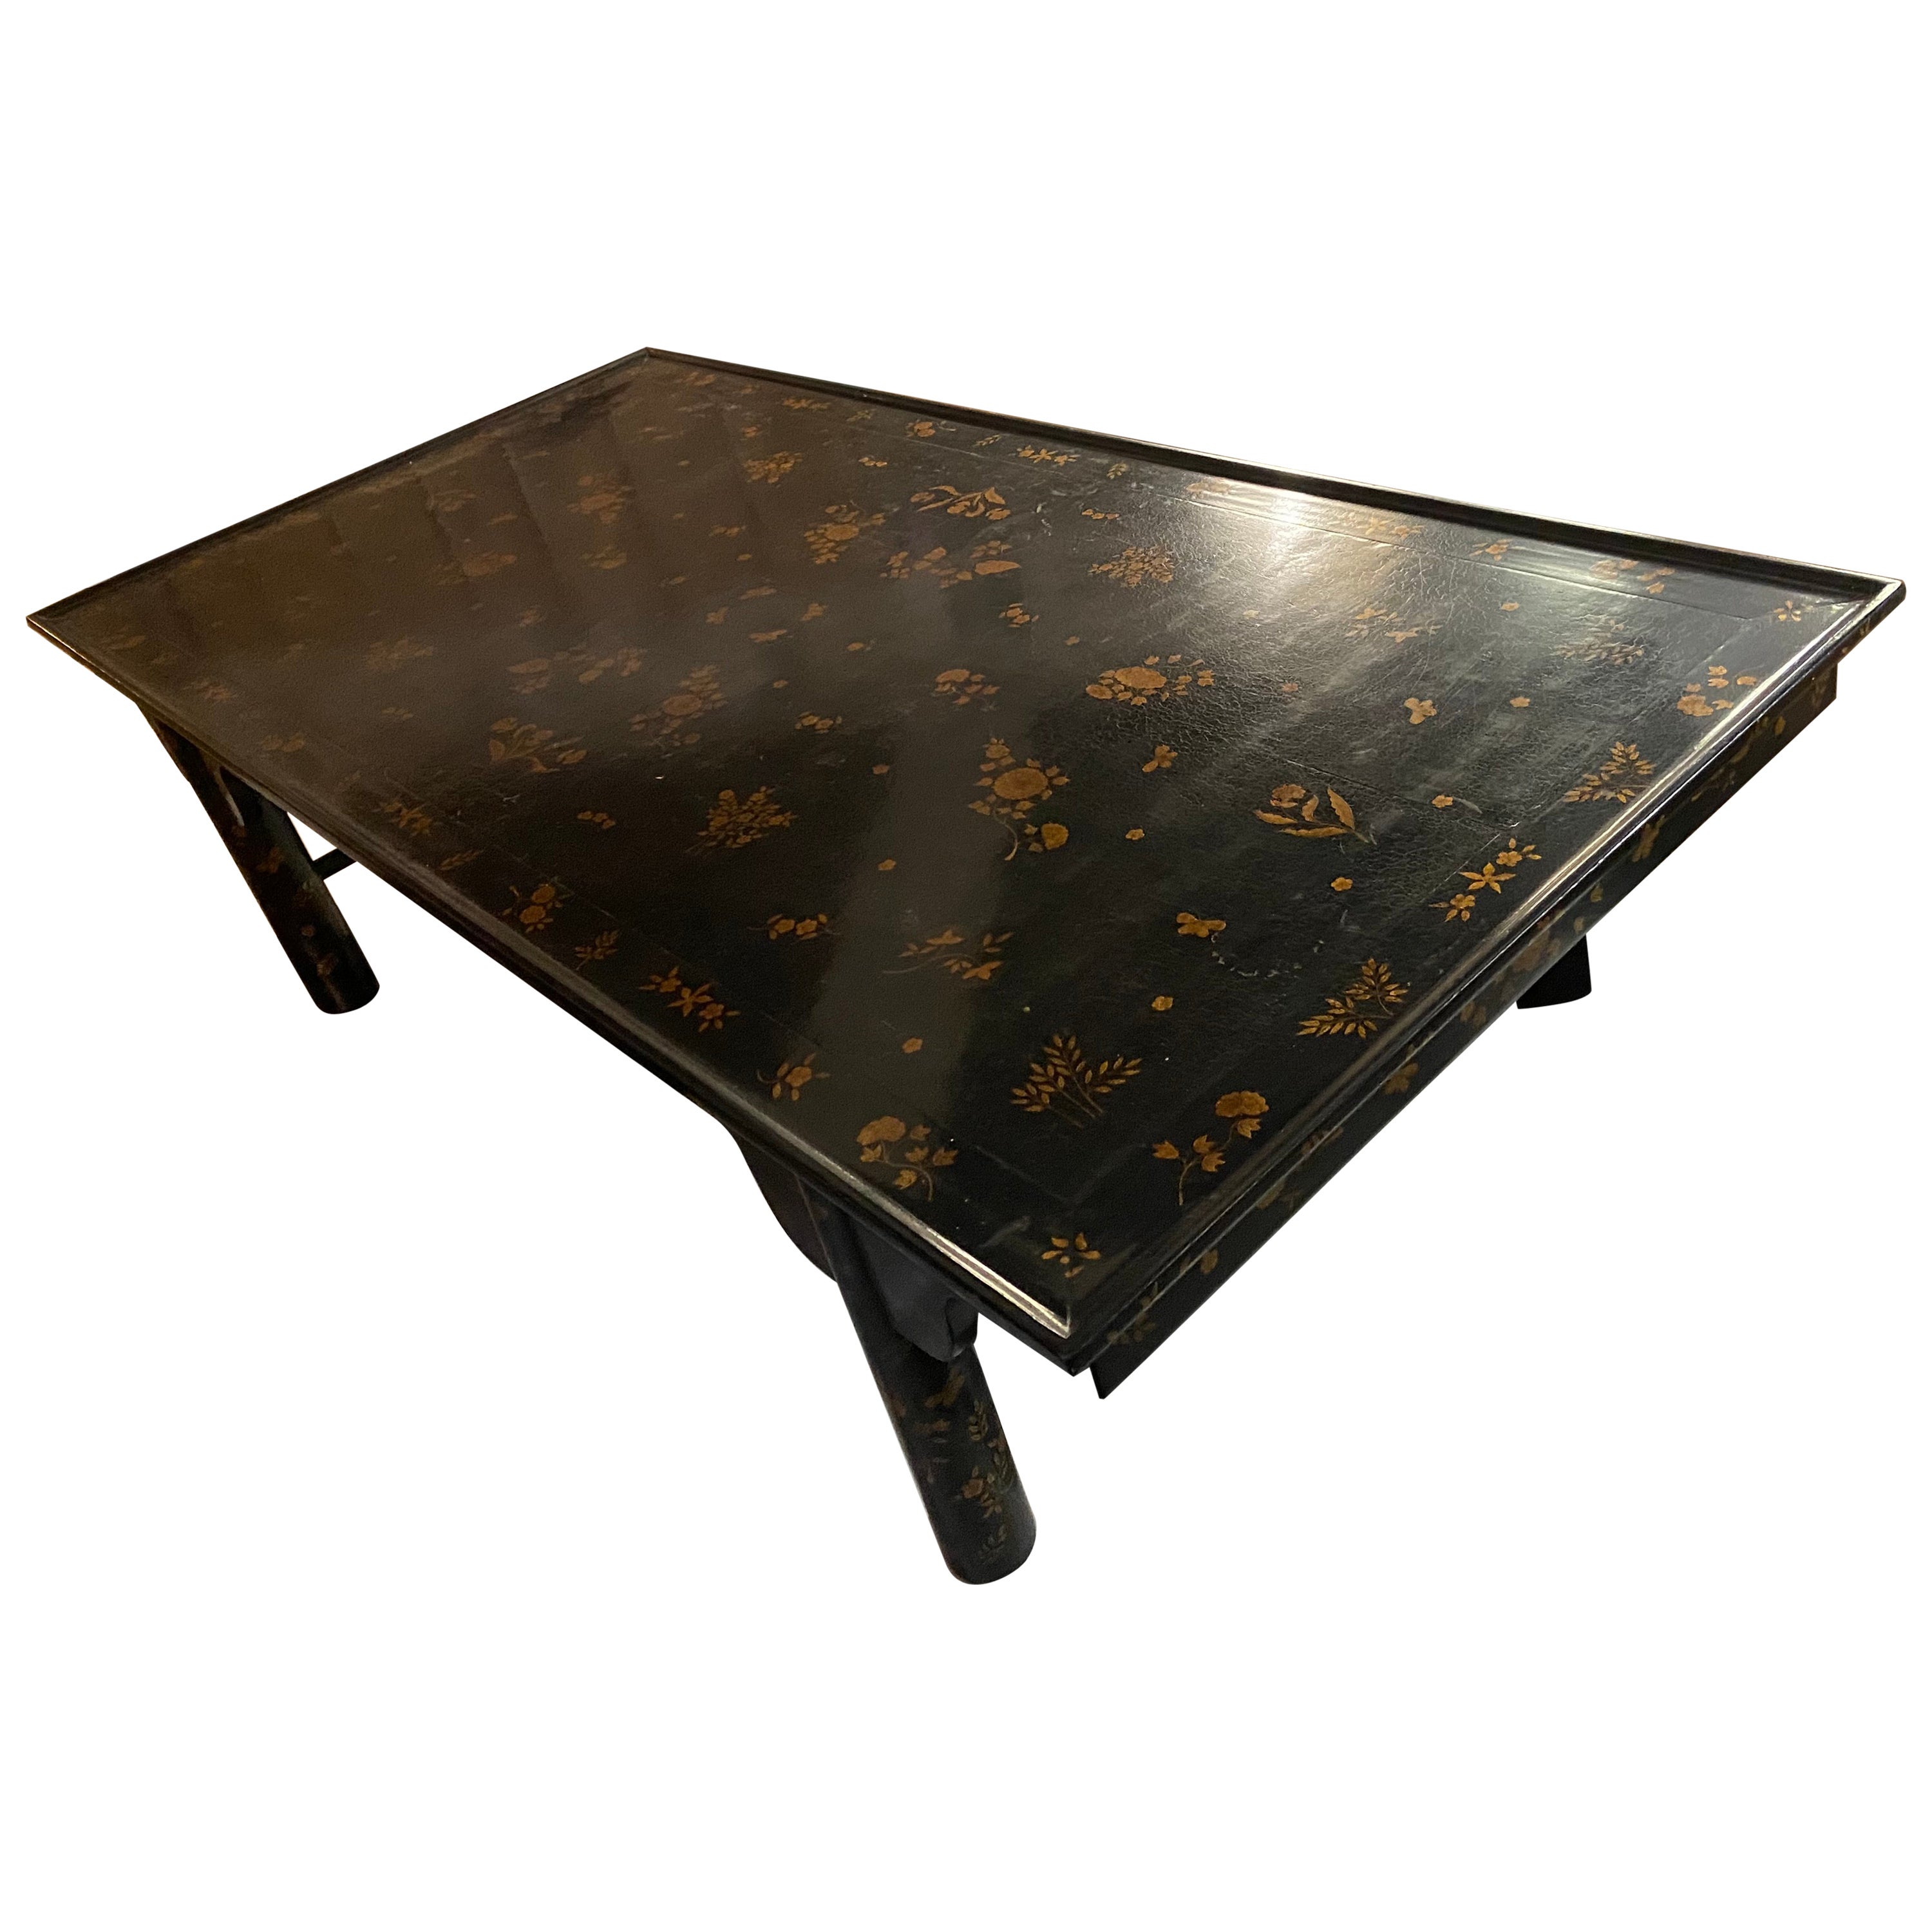 K'ang Hsi Coffee Table by Rose Tarlow "Melrose House"